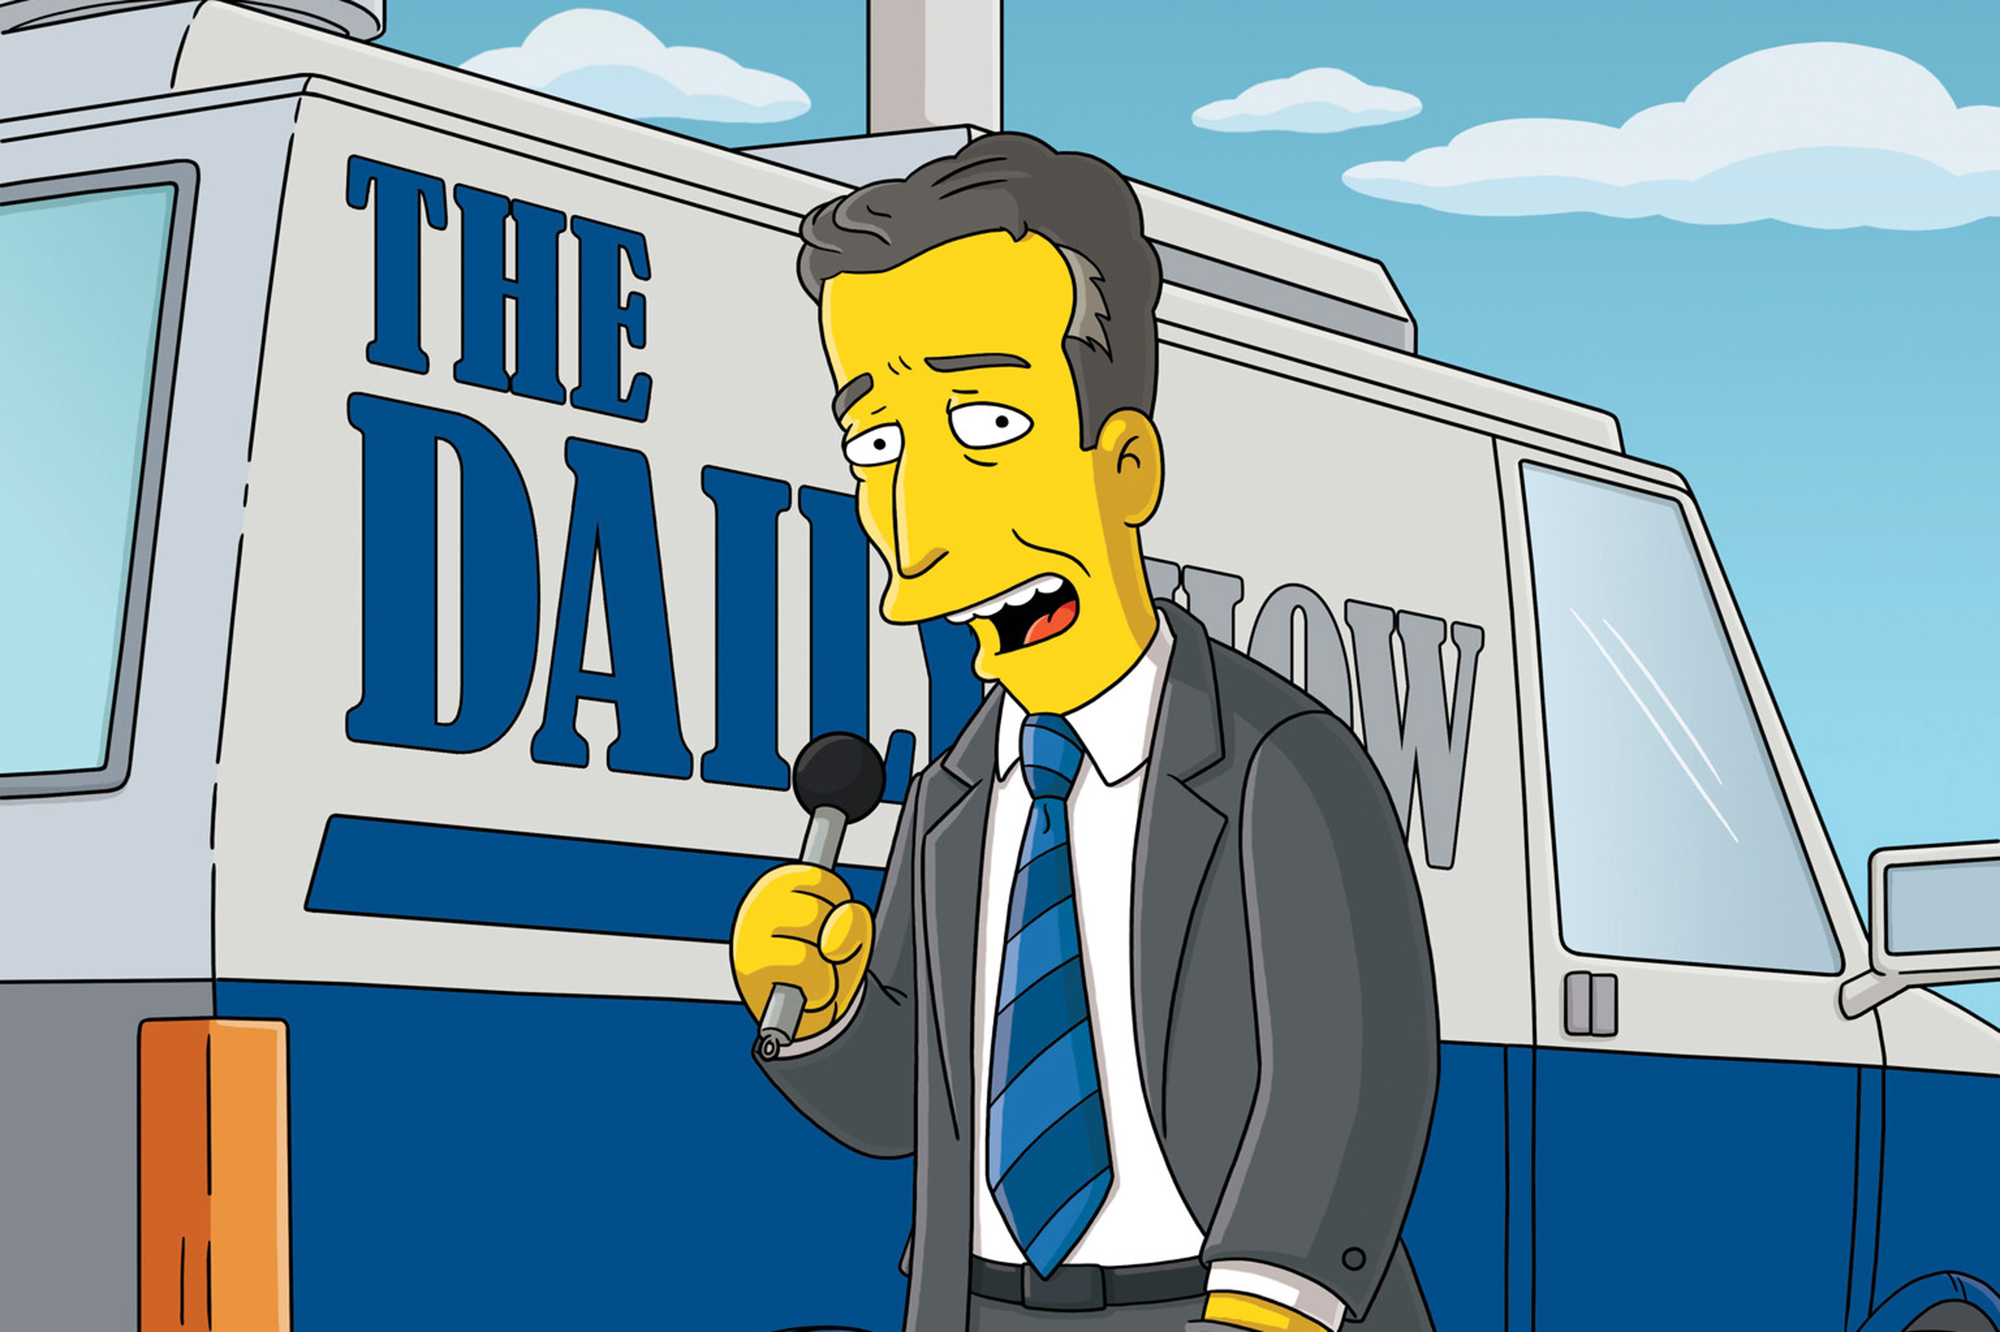 Jon Stewart: The former Daily Show host appeared as himself in "E. Pluribus Wiggum" in 2008, when Springfield holds the first presidential primary and its the residents rally behind their own candidate, Ralph Wiggum.